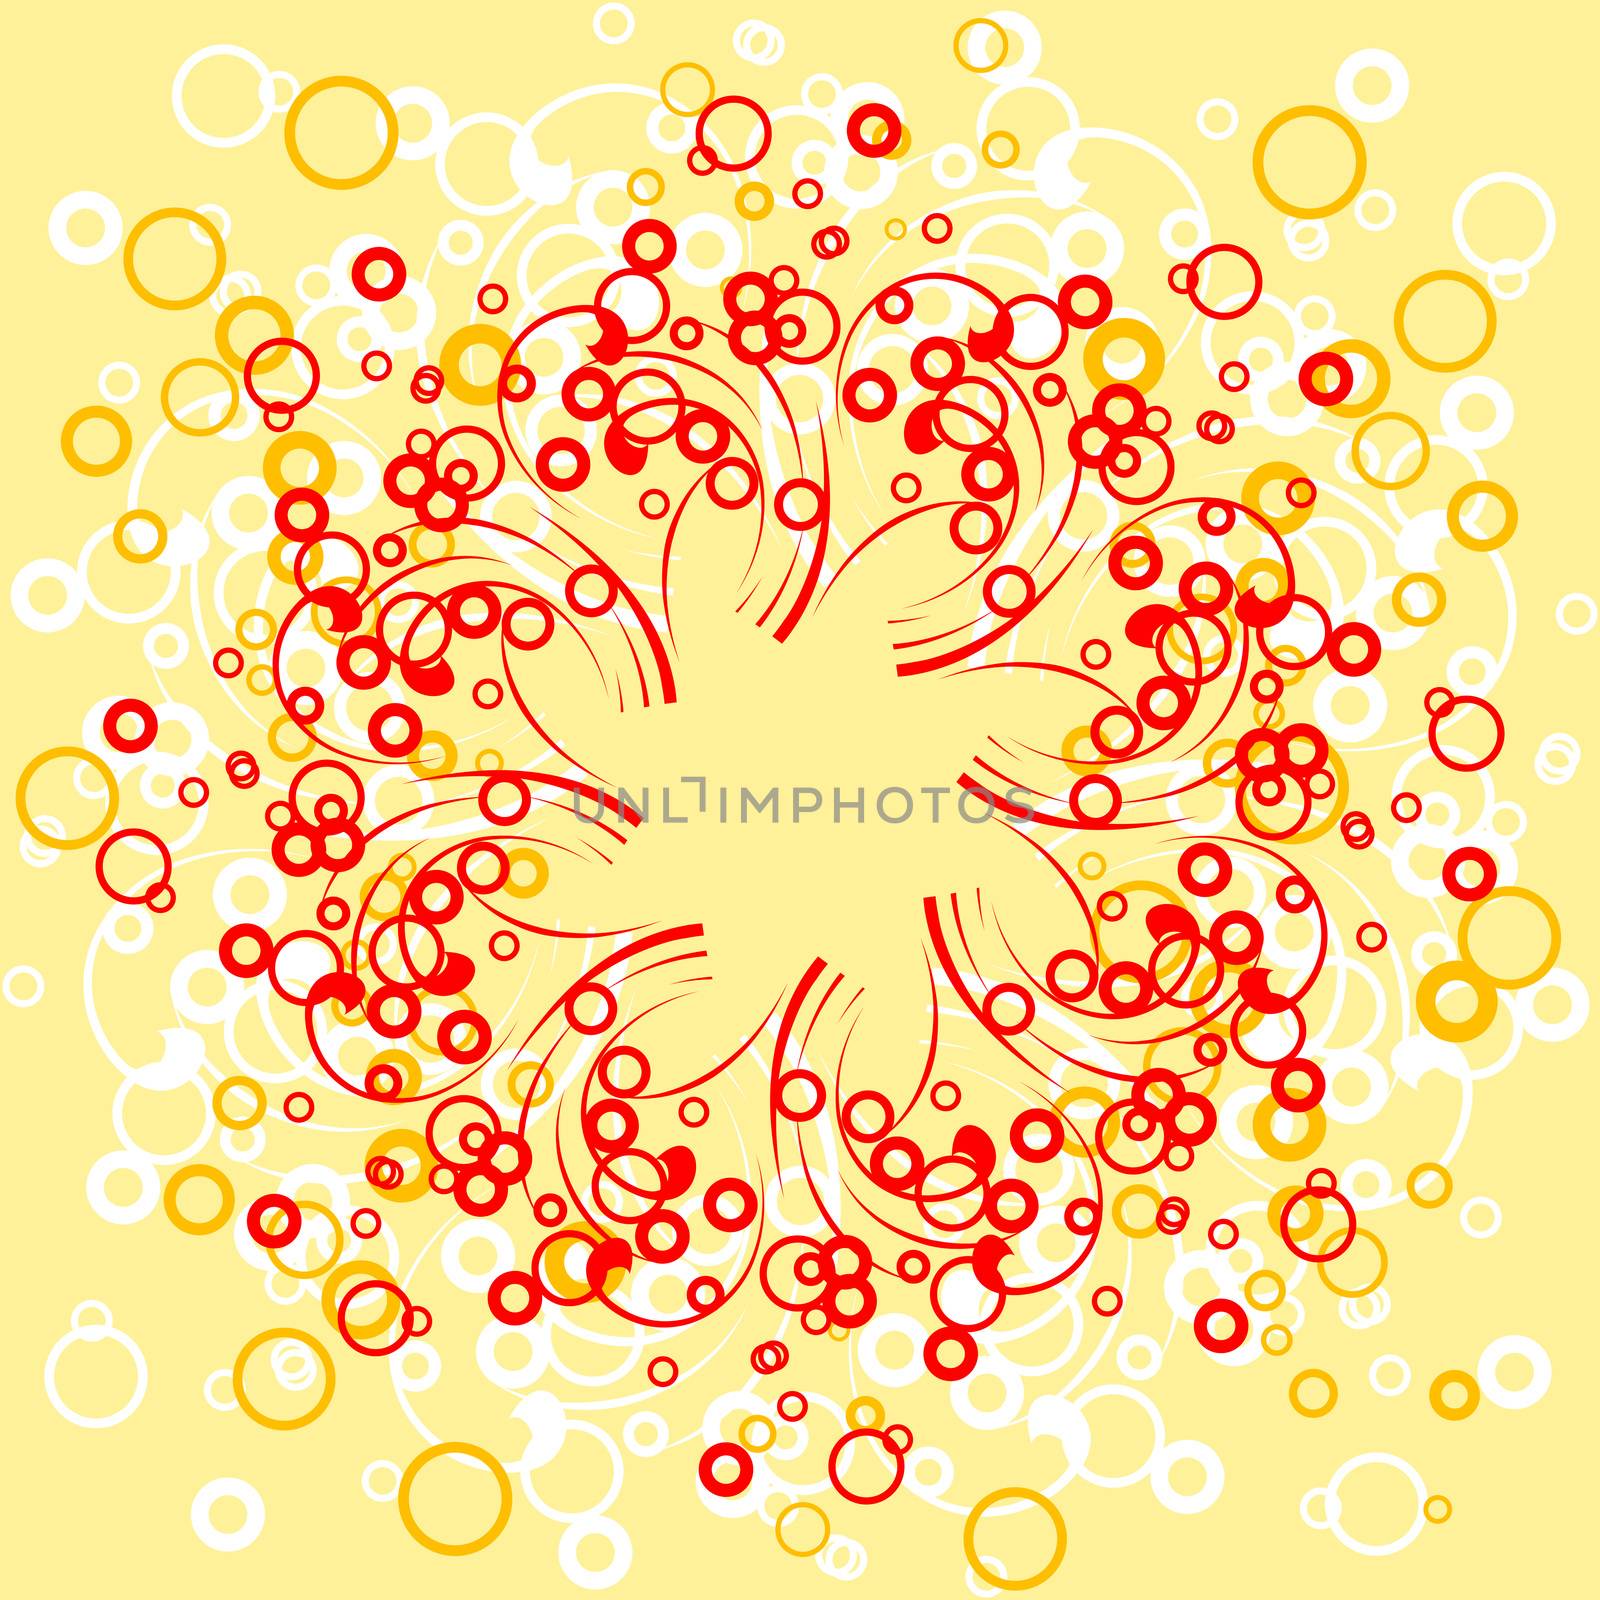 abstract background with circles and scrolls, vector illustratio by WaD